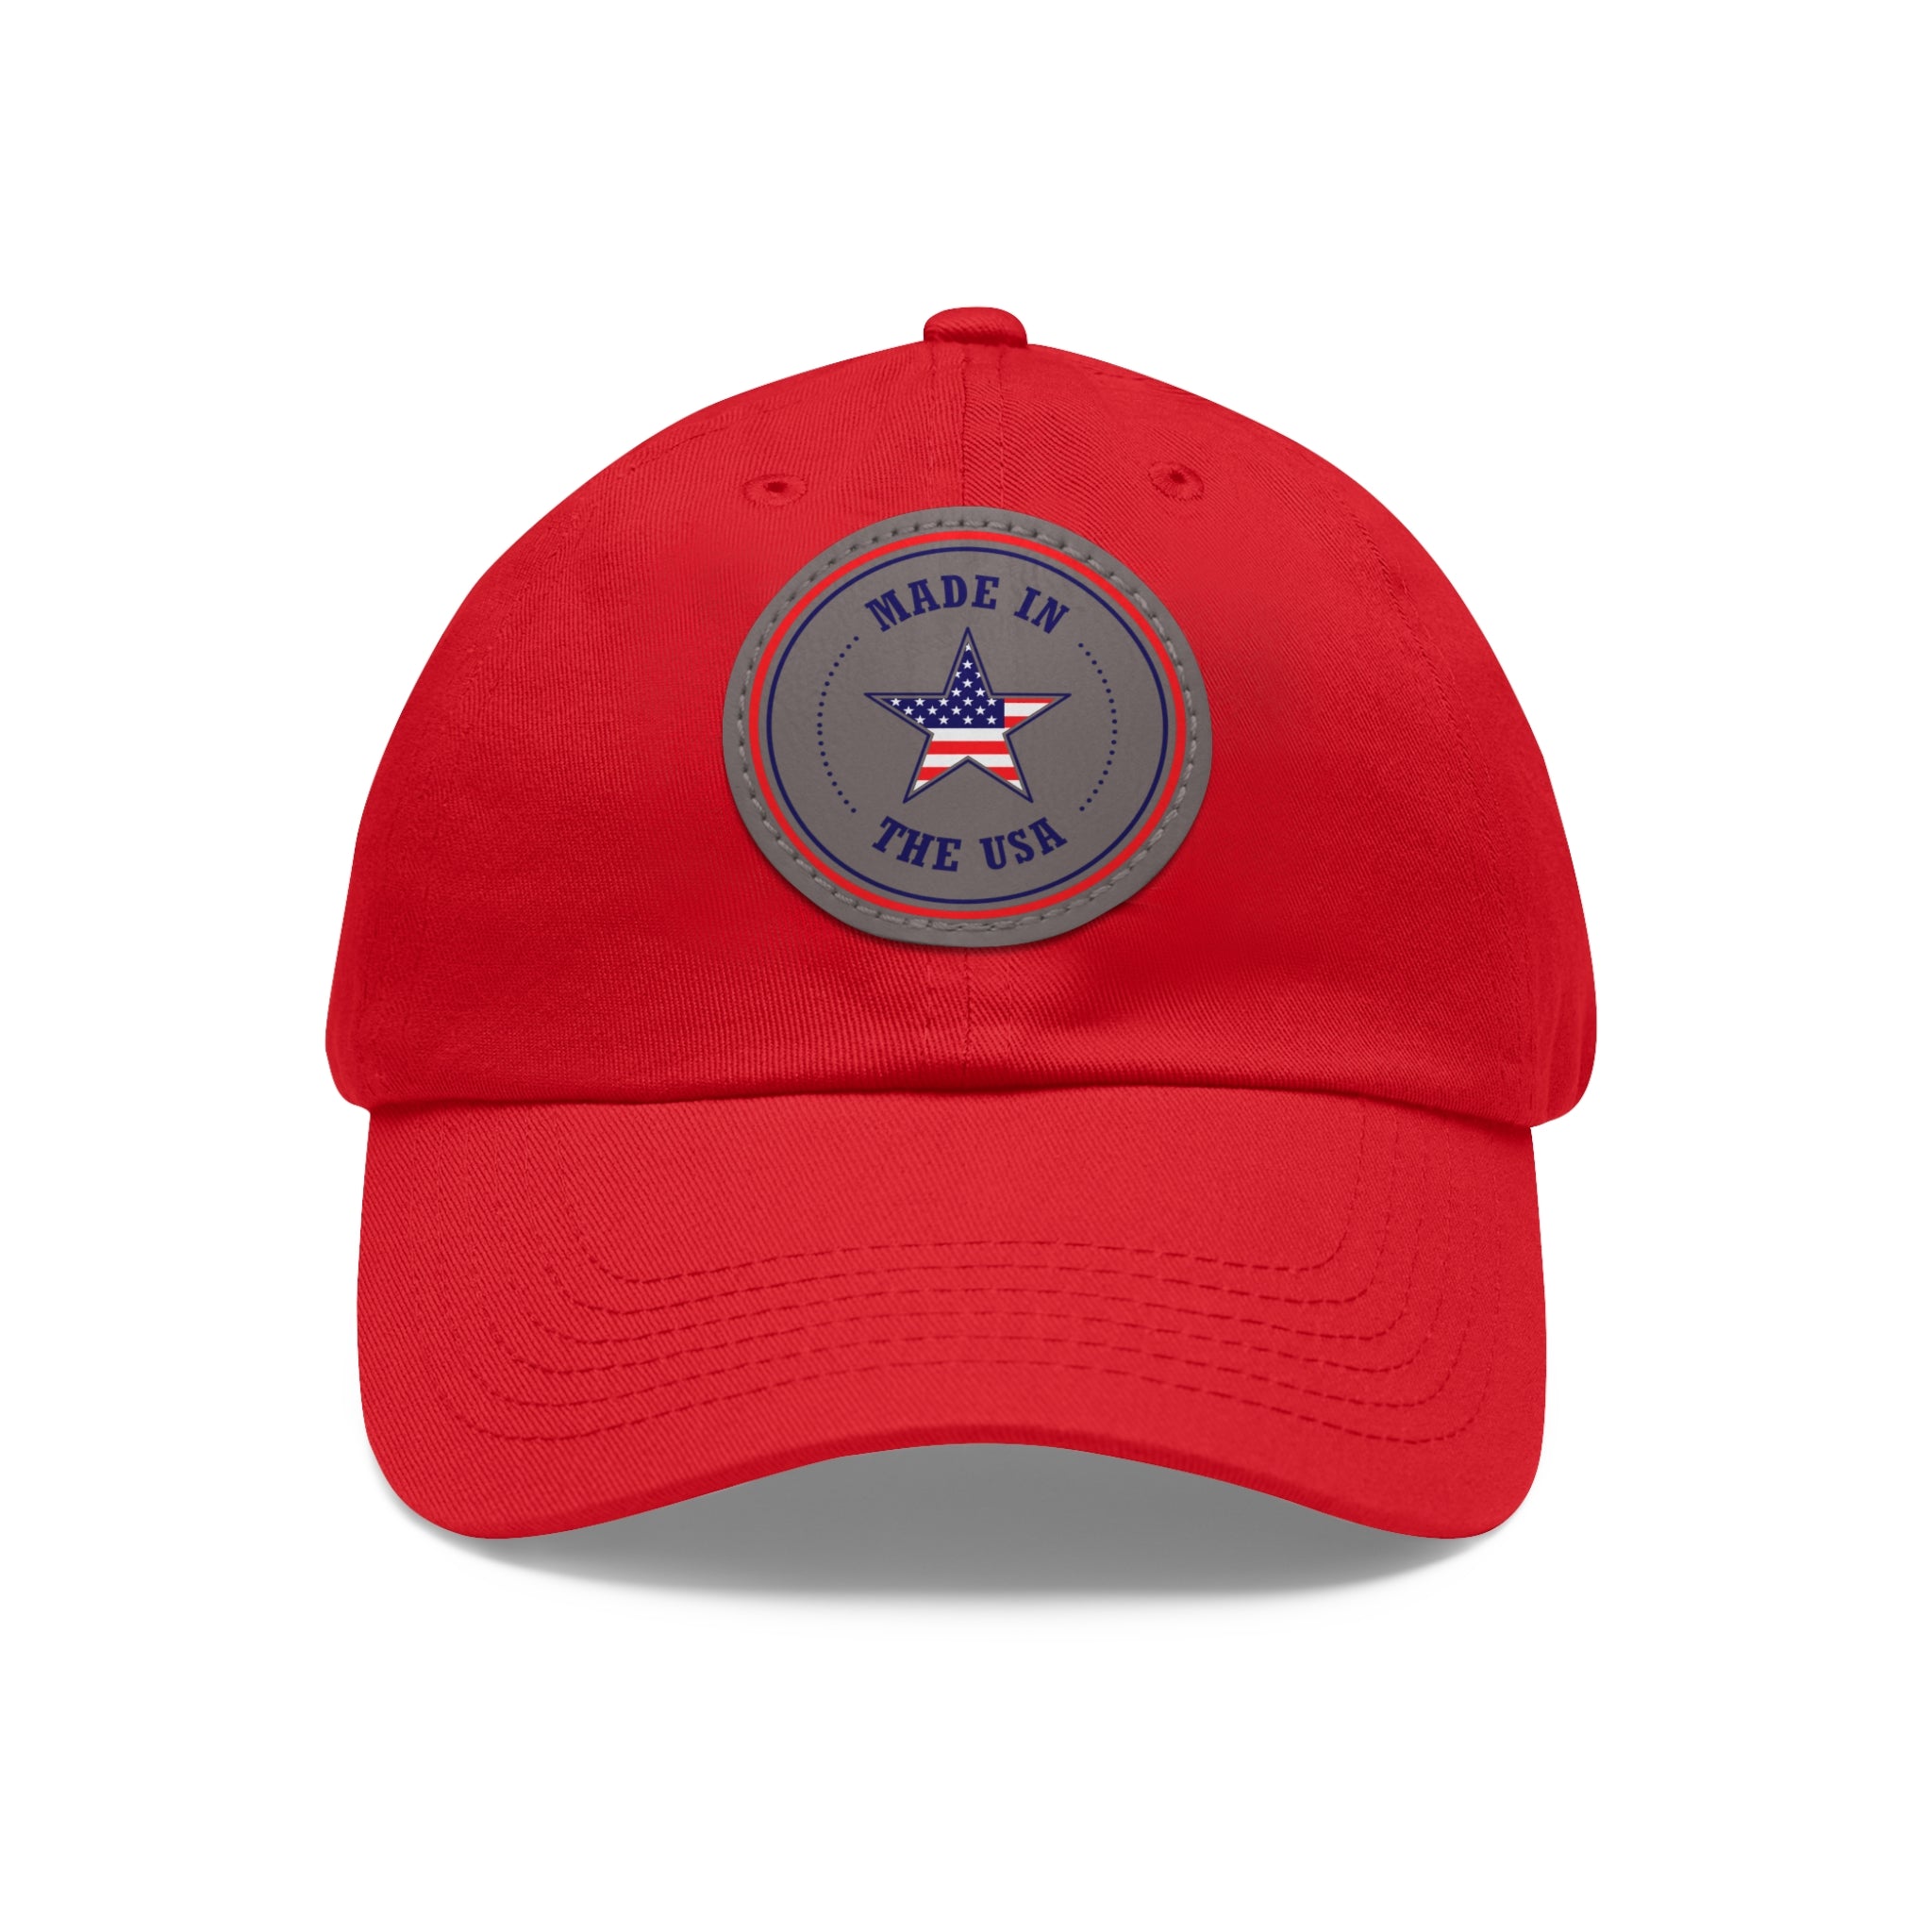 Made in the USA Dad Hat